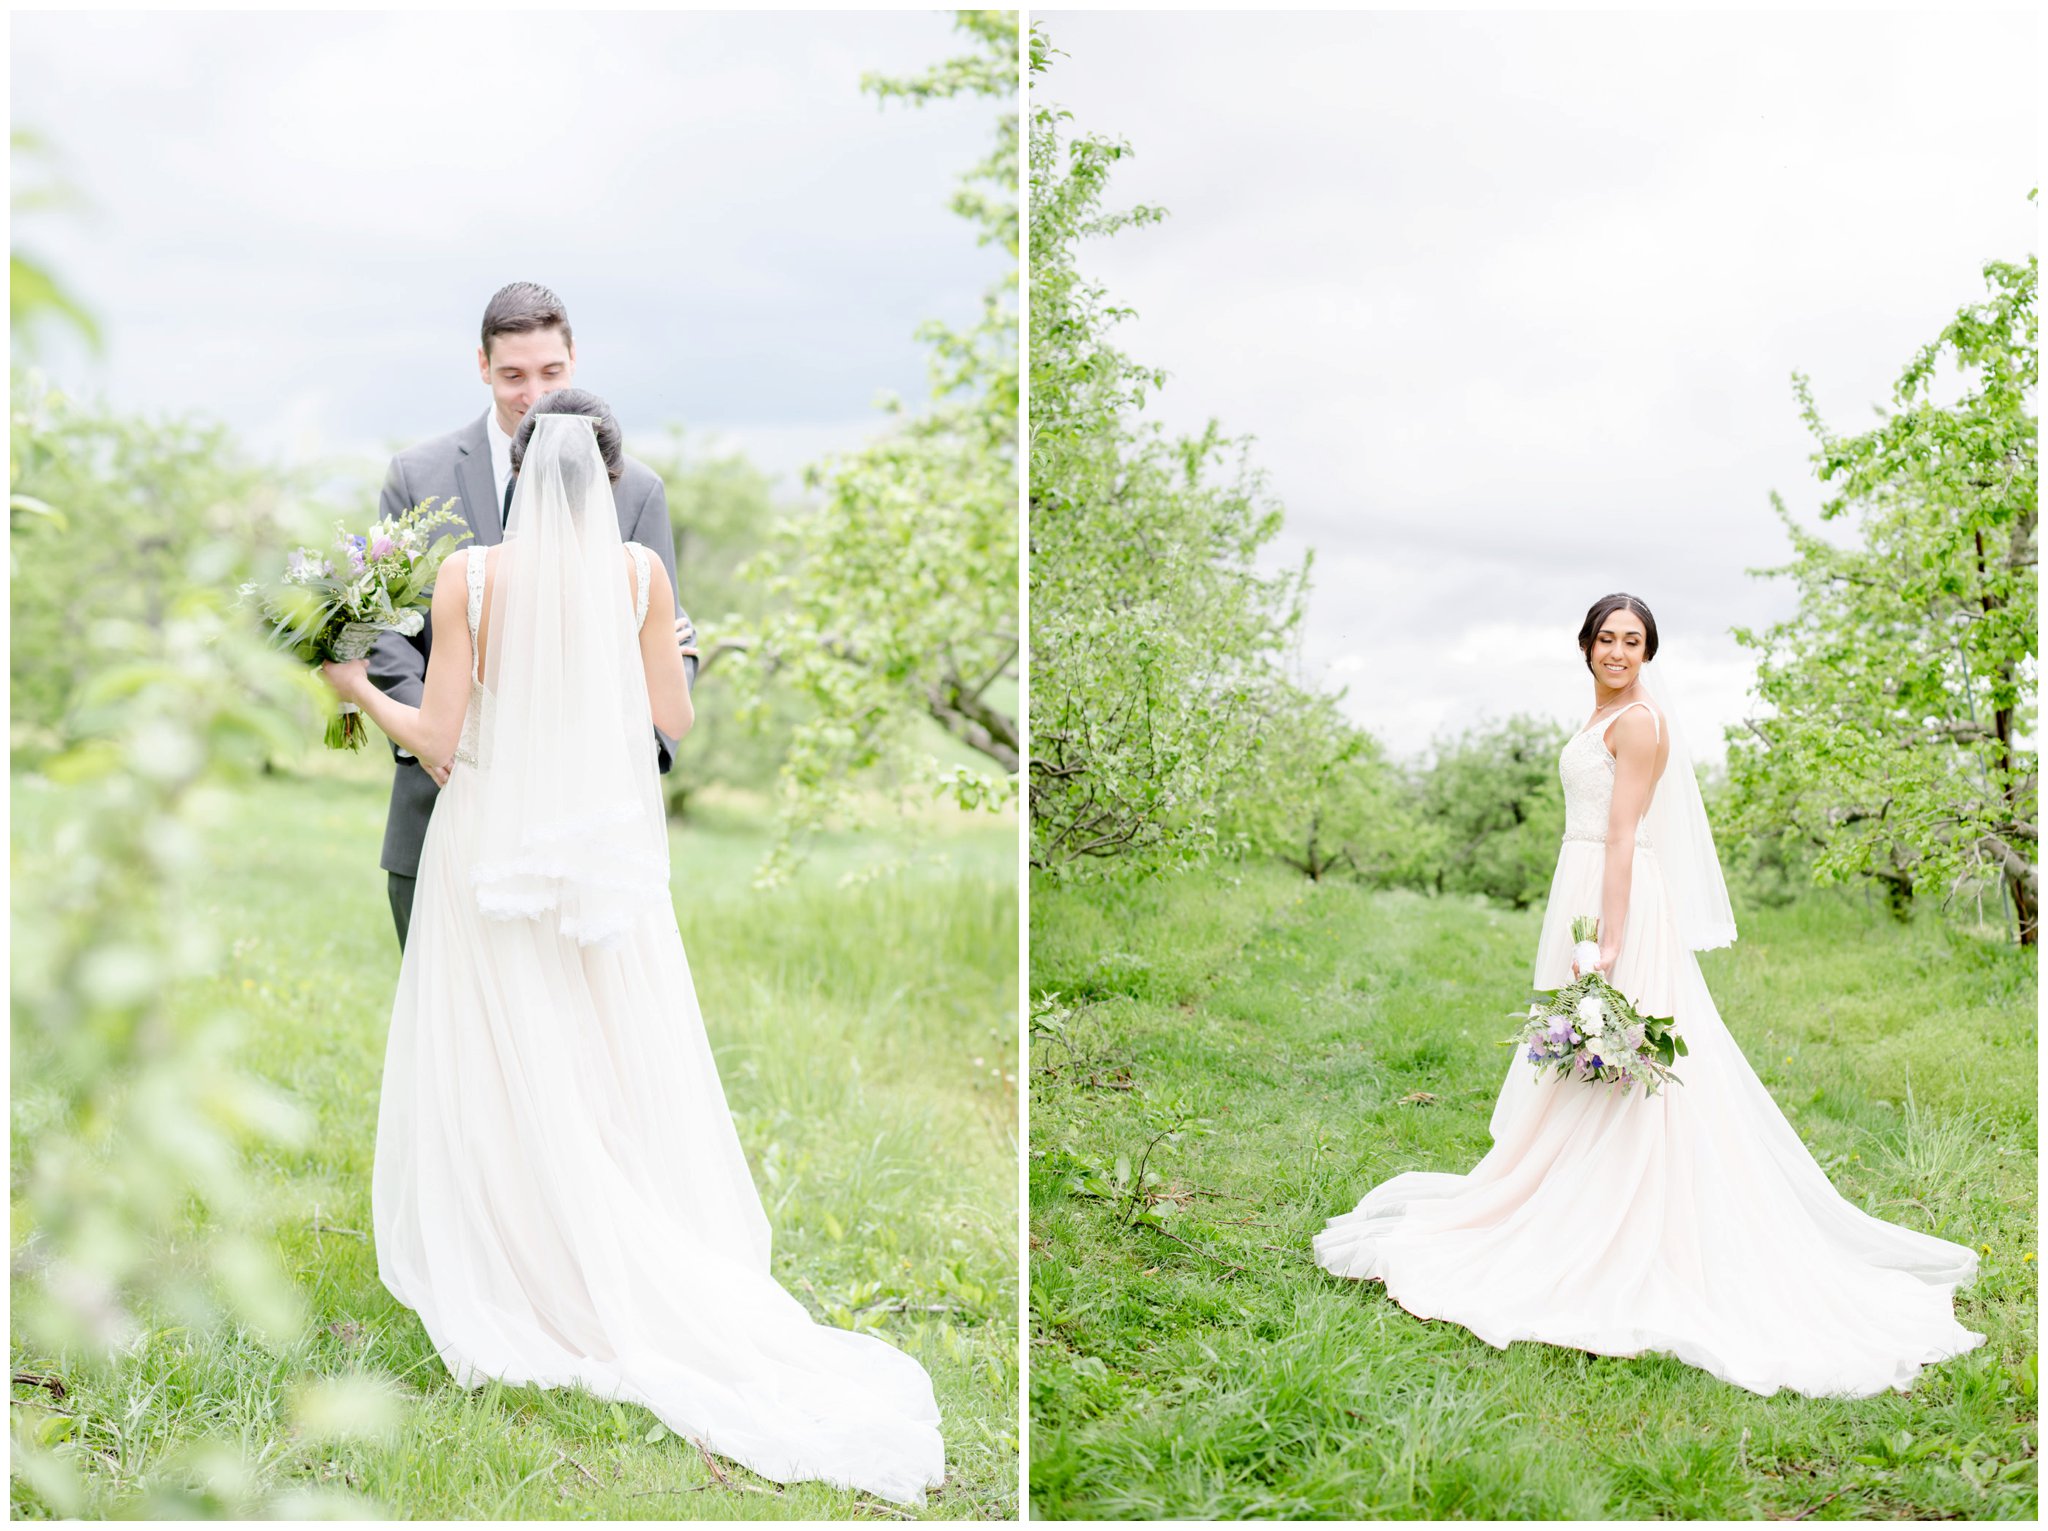 Rodale Institute Wedding - Laura Lee Photography